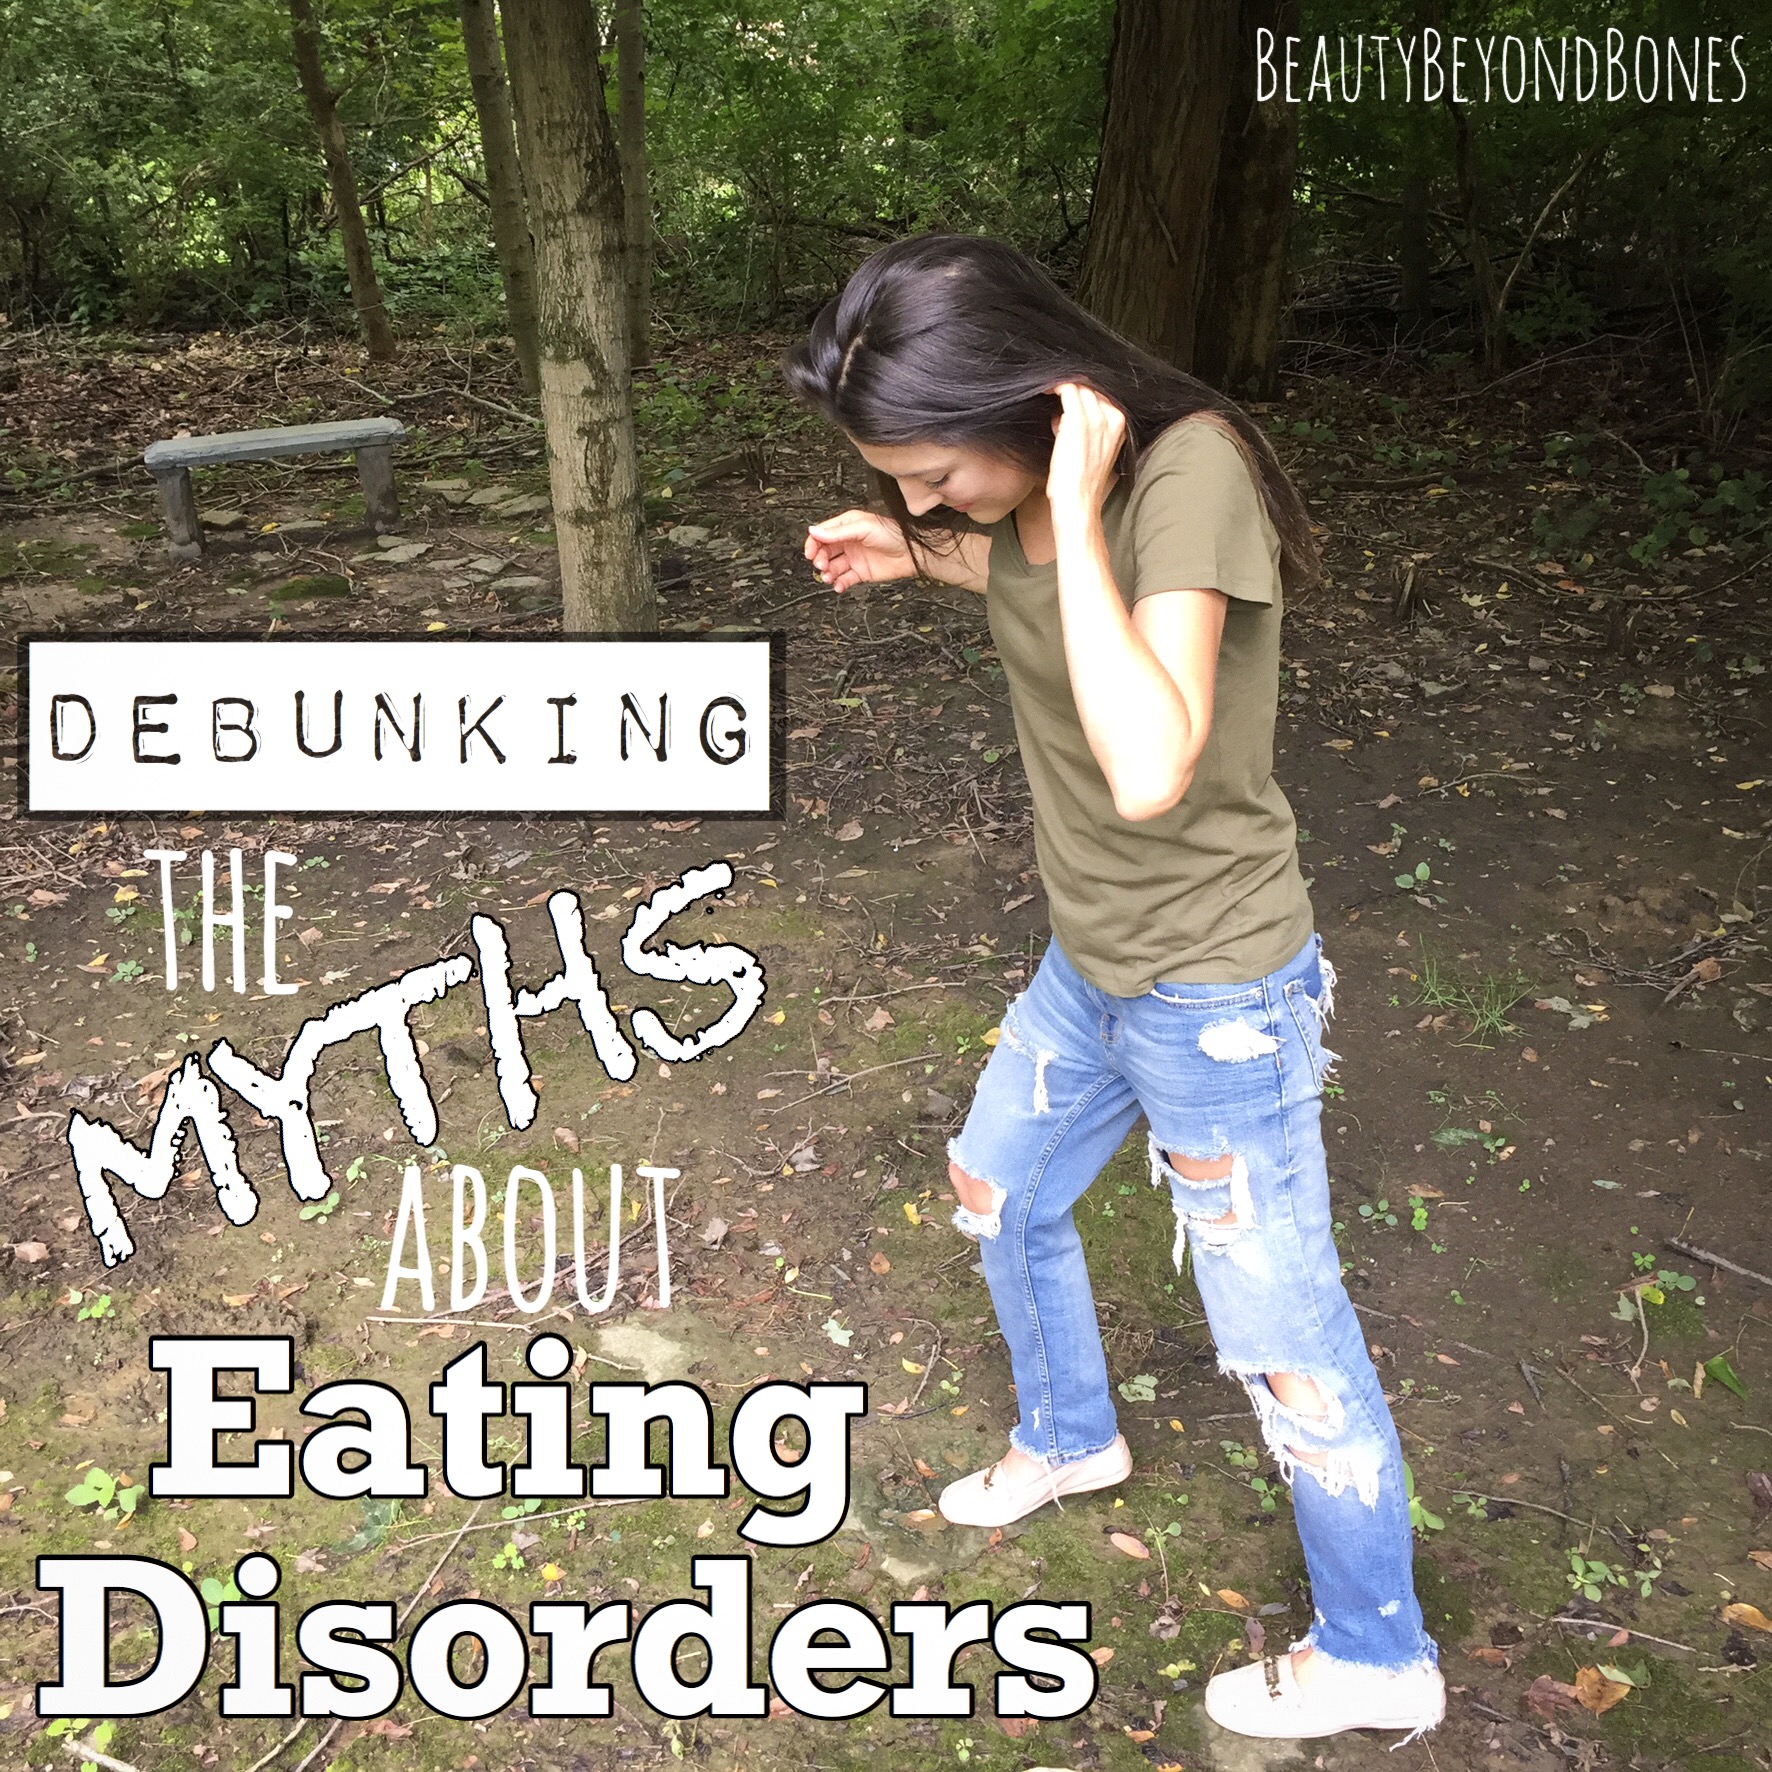 Debunking the Myths of Eating Disorders – VIDEO!